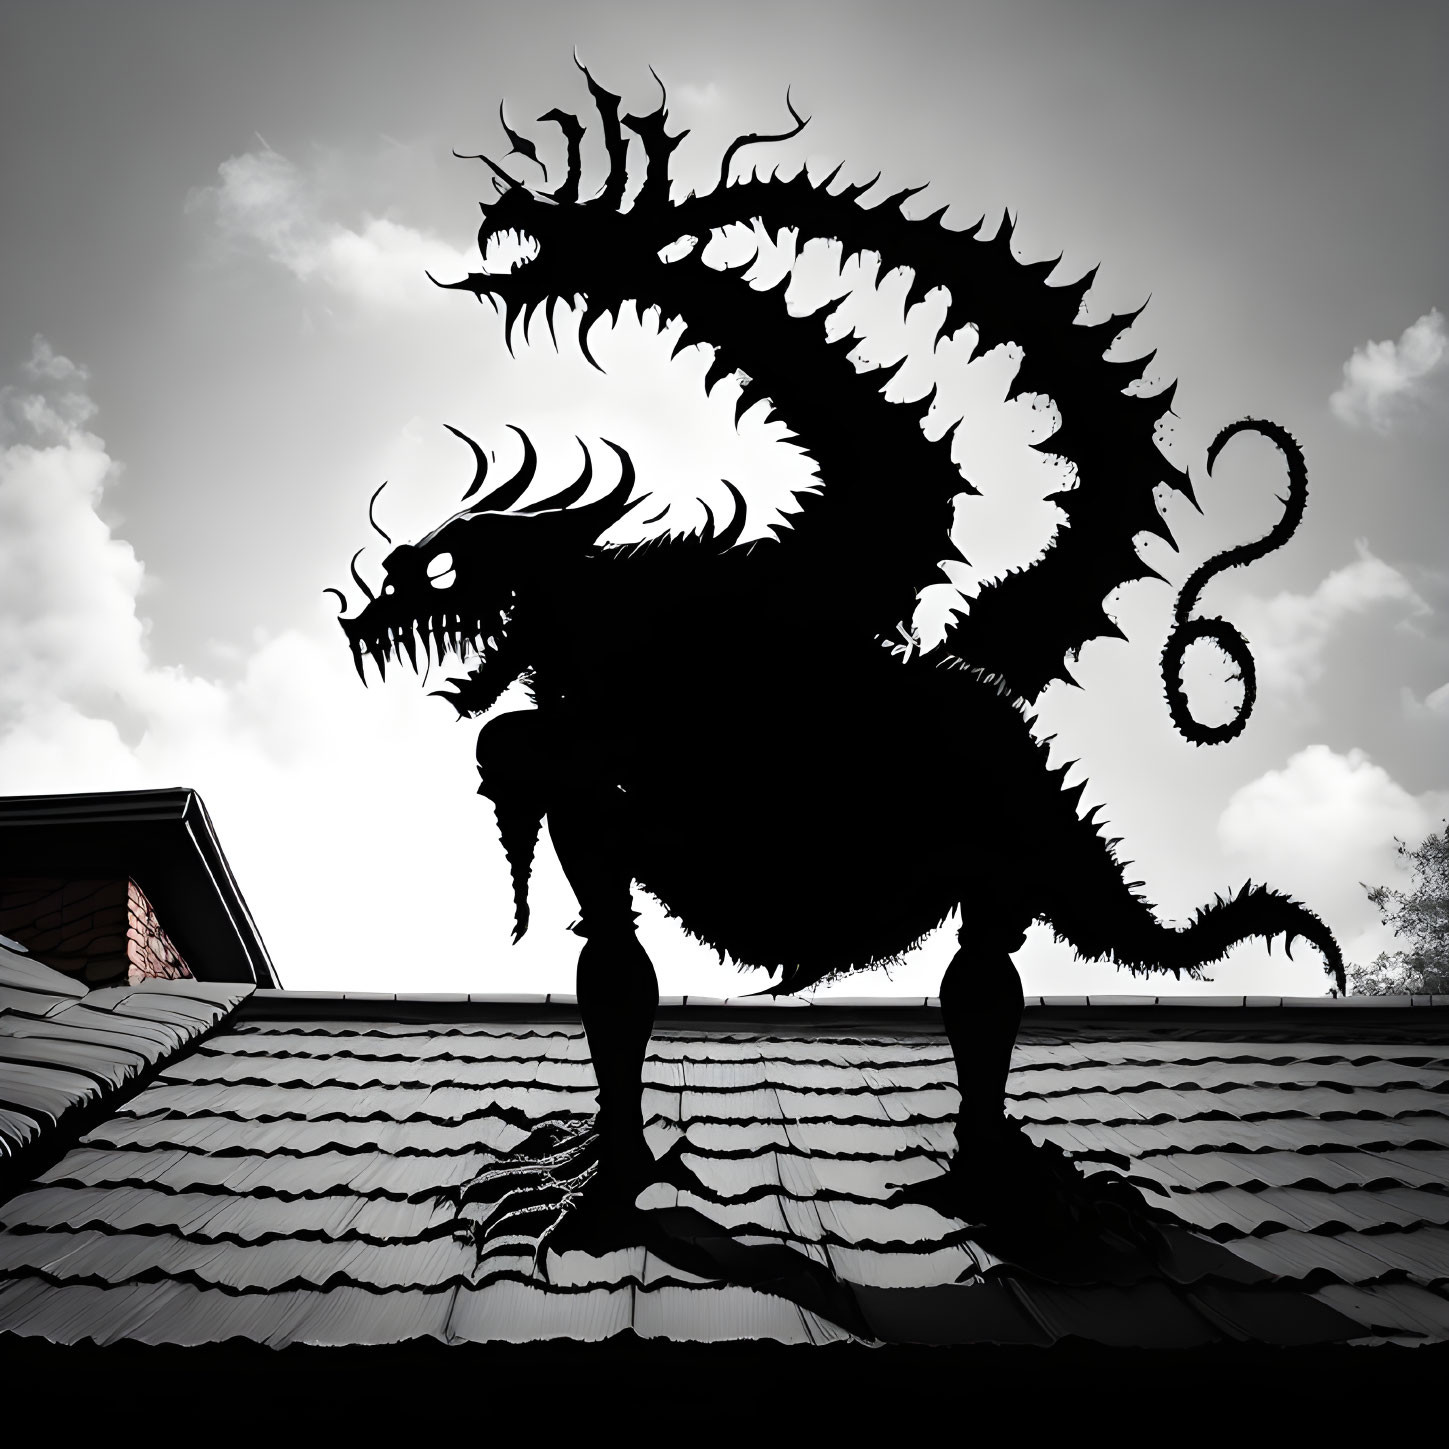 Fearsome dragon silhouette with spikes on roof against cloudy sky